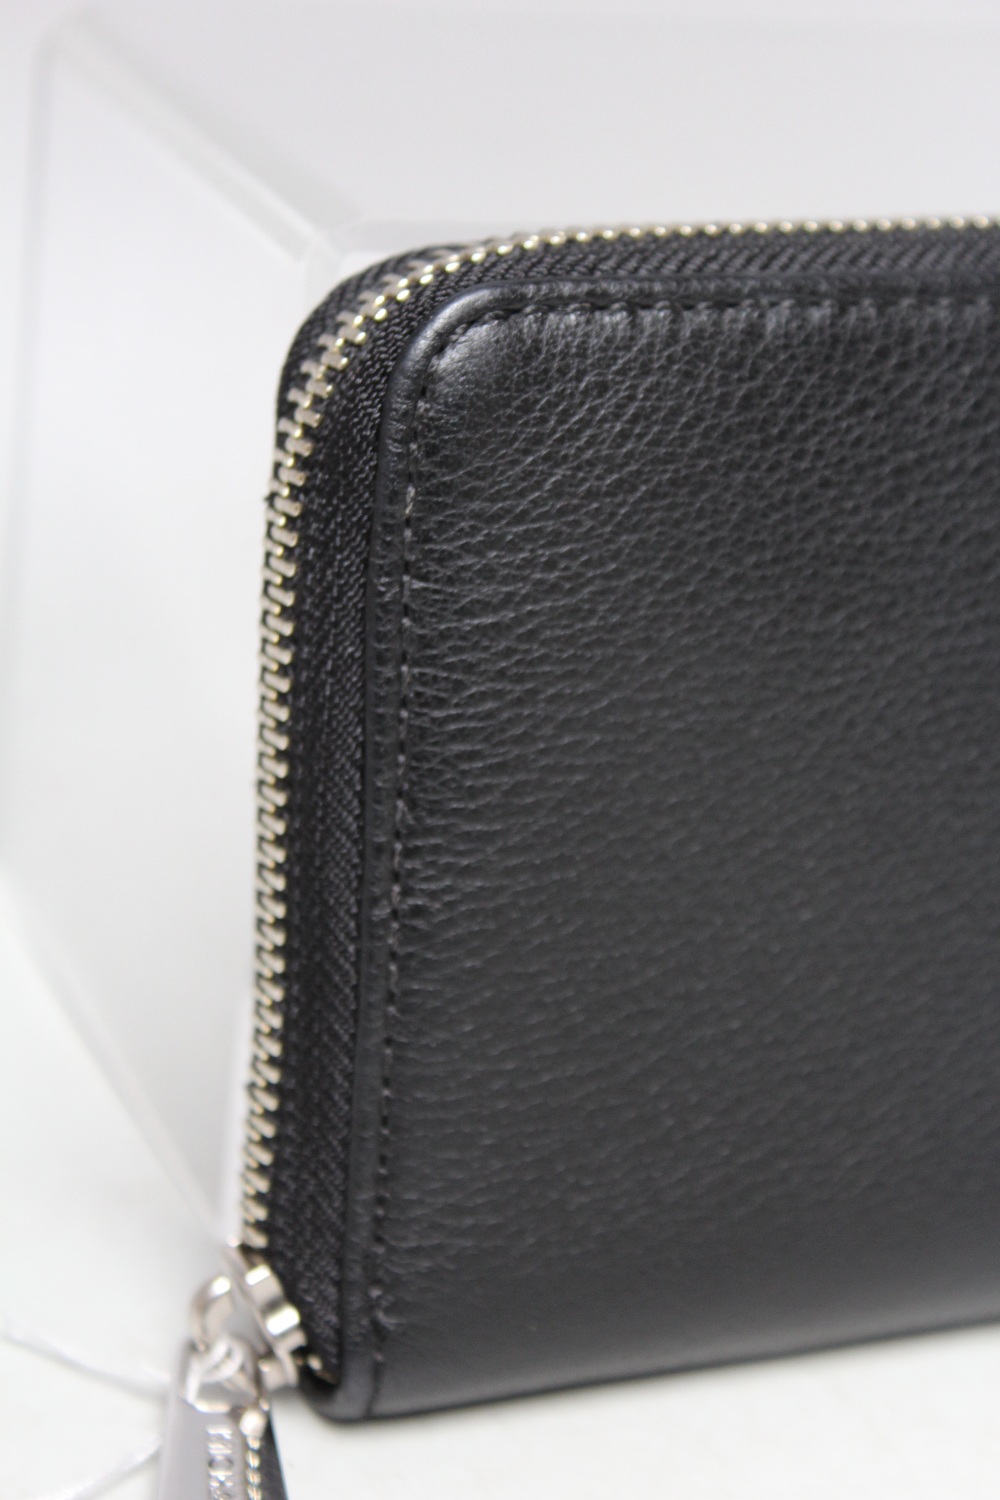 A MICHAEL KORS BLACK LEATHER LADIES WALLET, subtle textured effect finish, note compartments, zip - Image 3 of 4